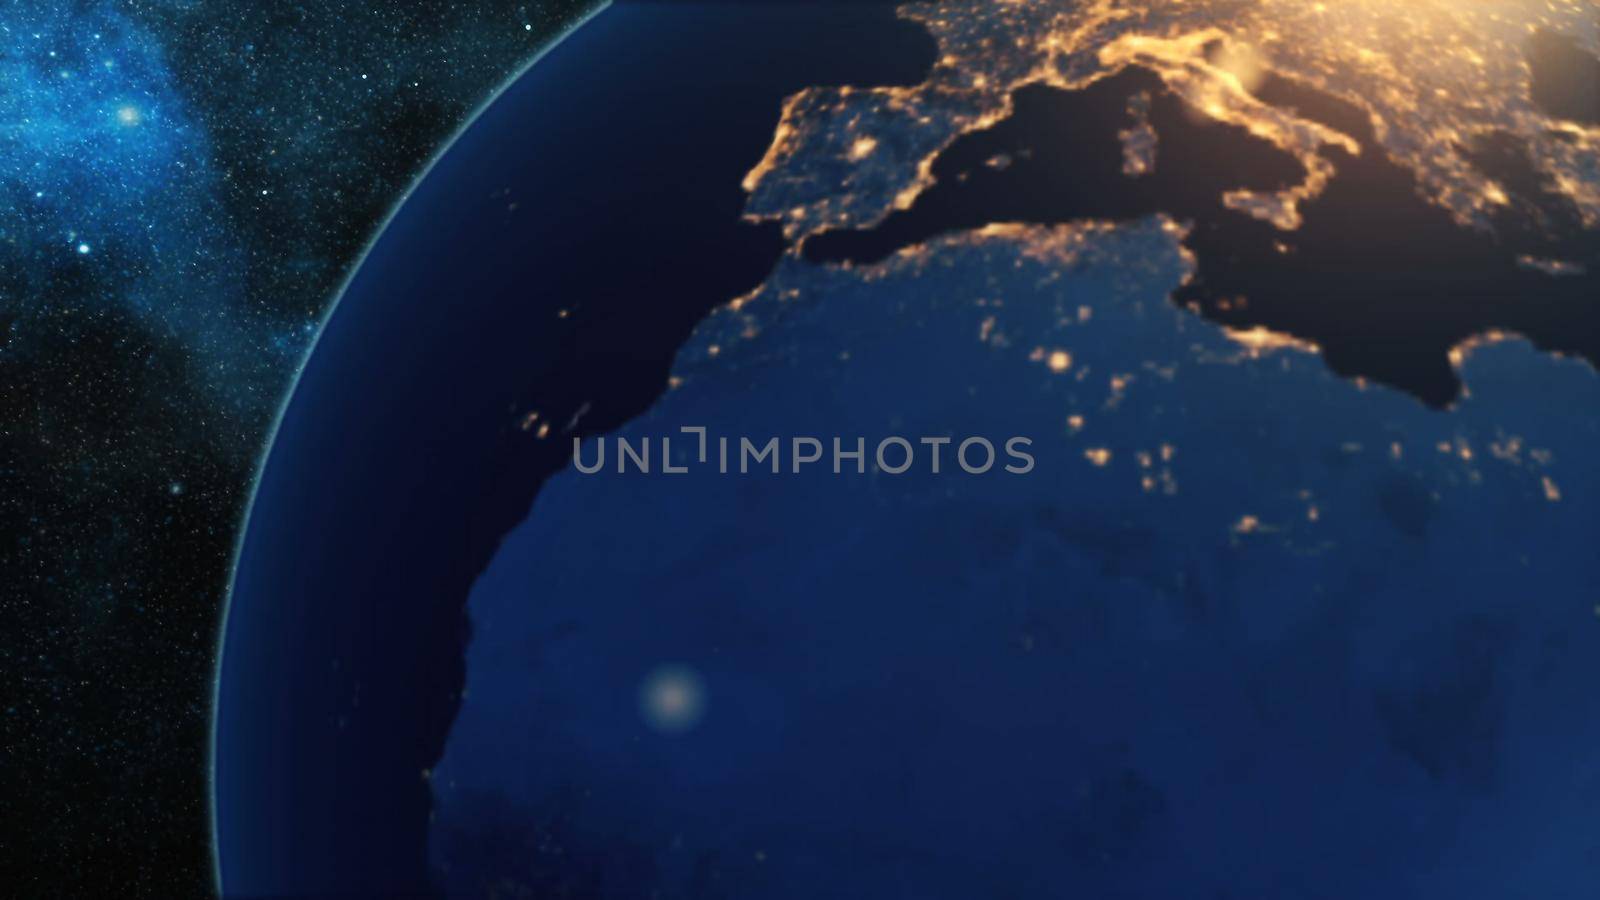 Realistic Planet Earth from space. Abstract Background